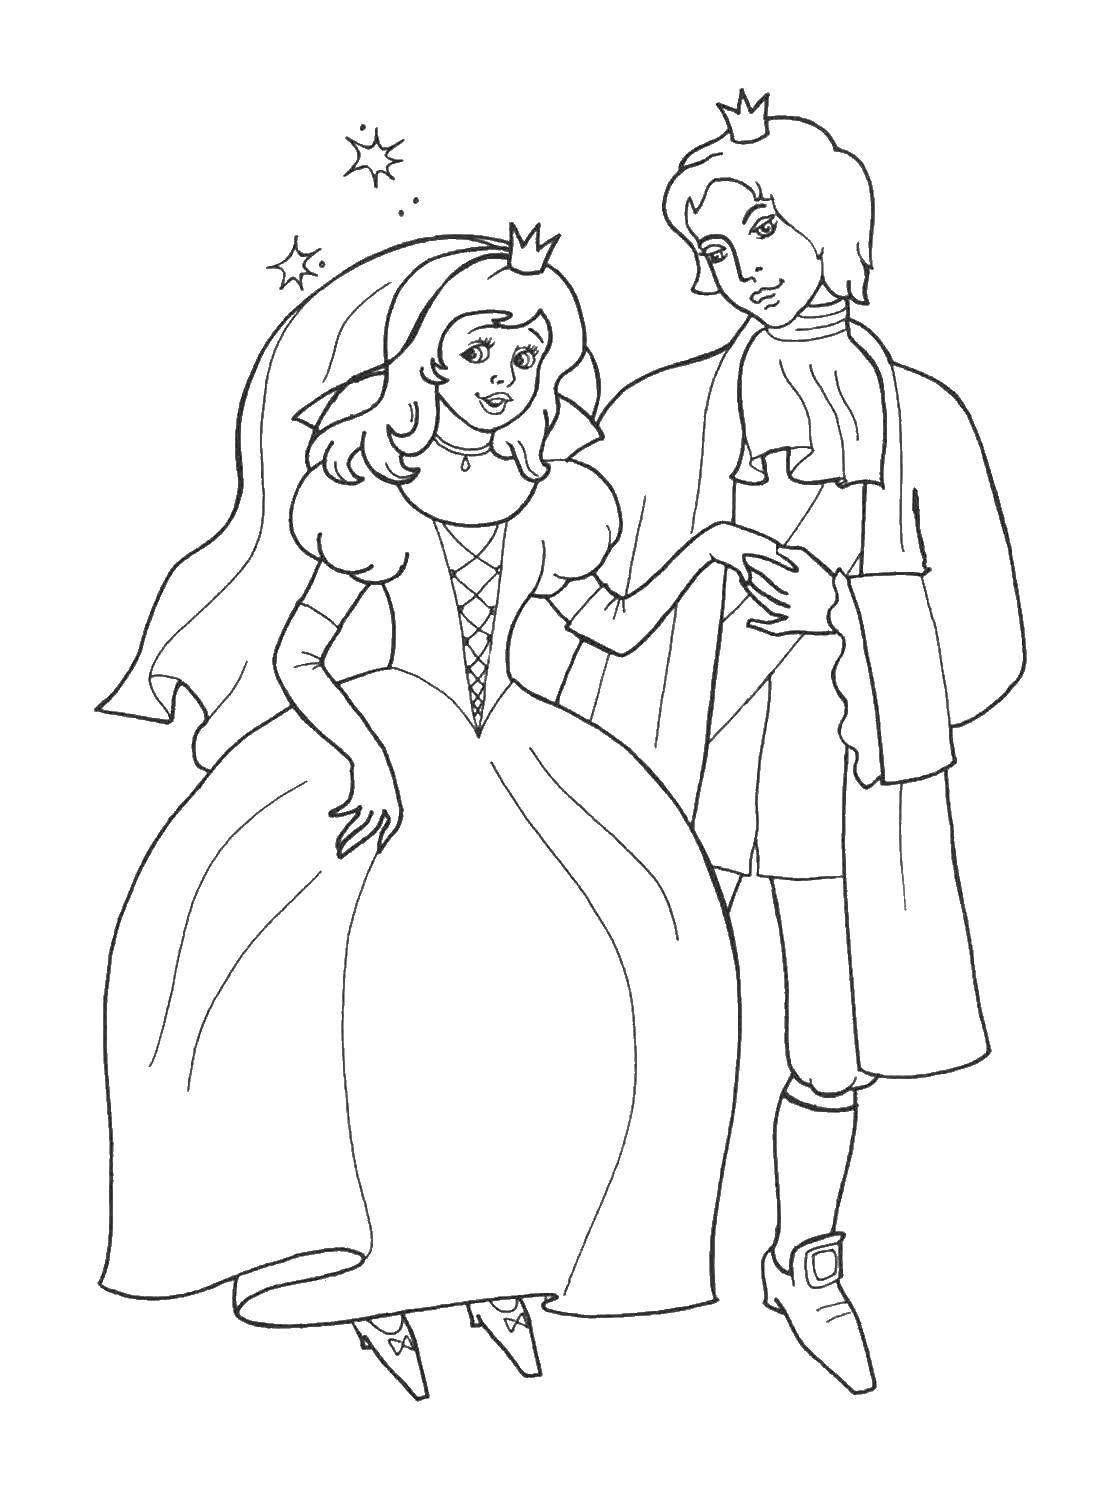 Coloring The Prince and Princess get married. Category wedding. Tags:  Wedding, dress, bride, groom.